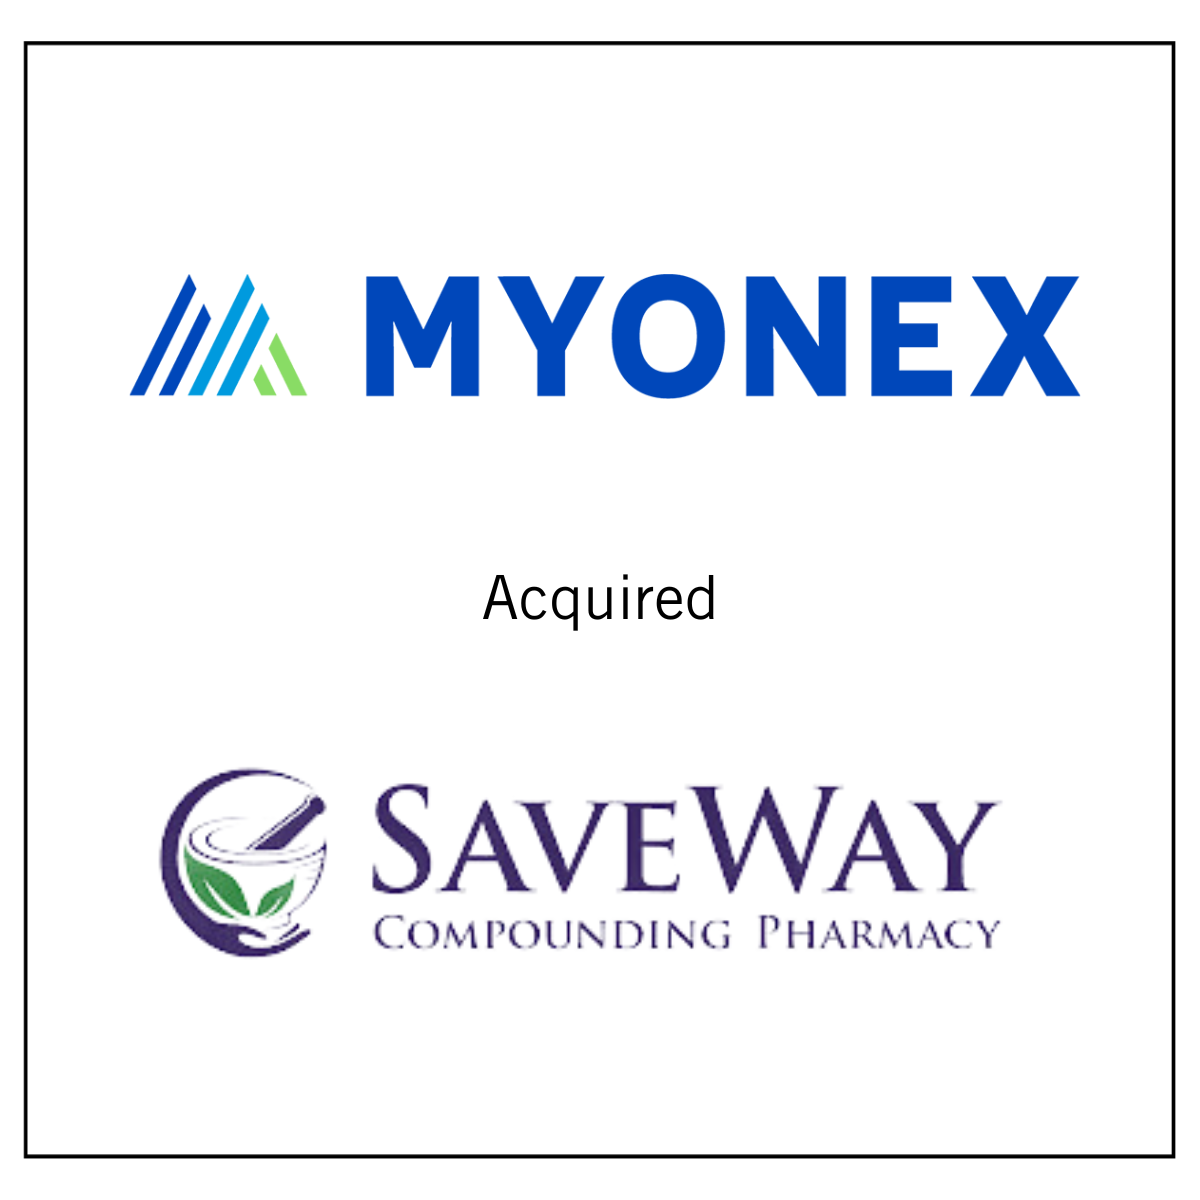 Myonex Acquired SaveWay Compounding Pharmacy to Expand and Bolster its Clinical Trial Services Across the US